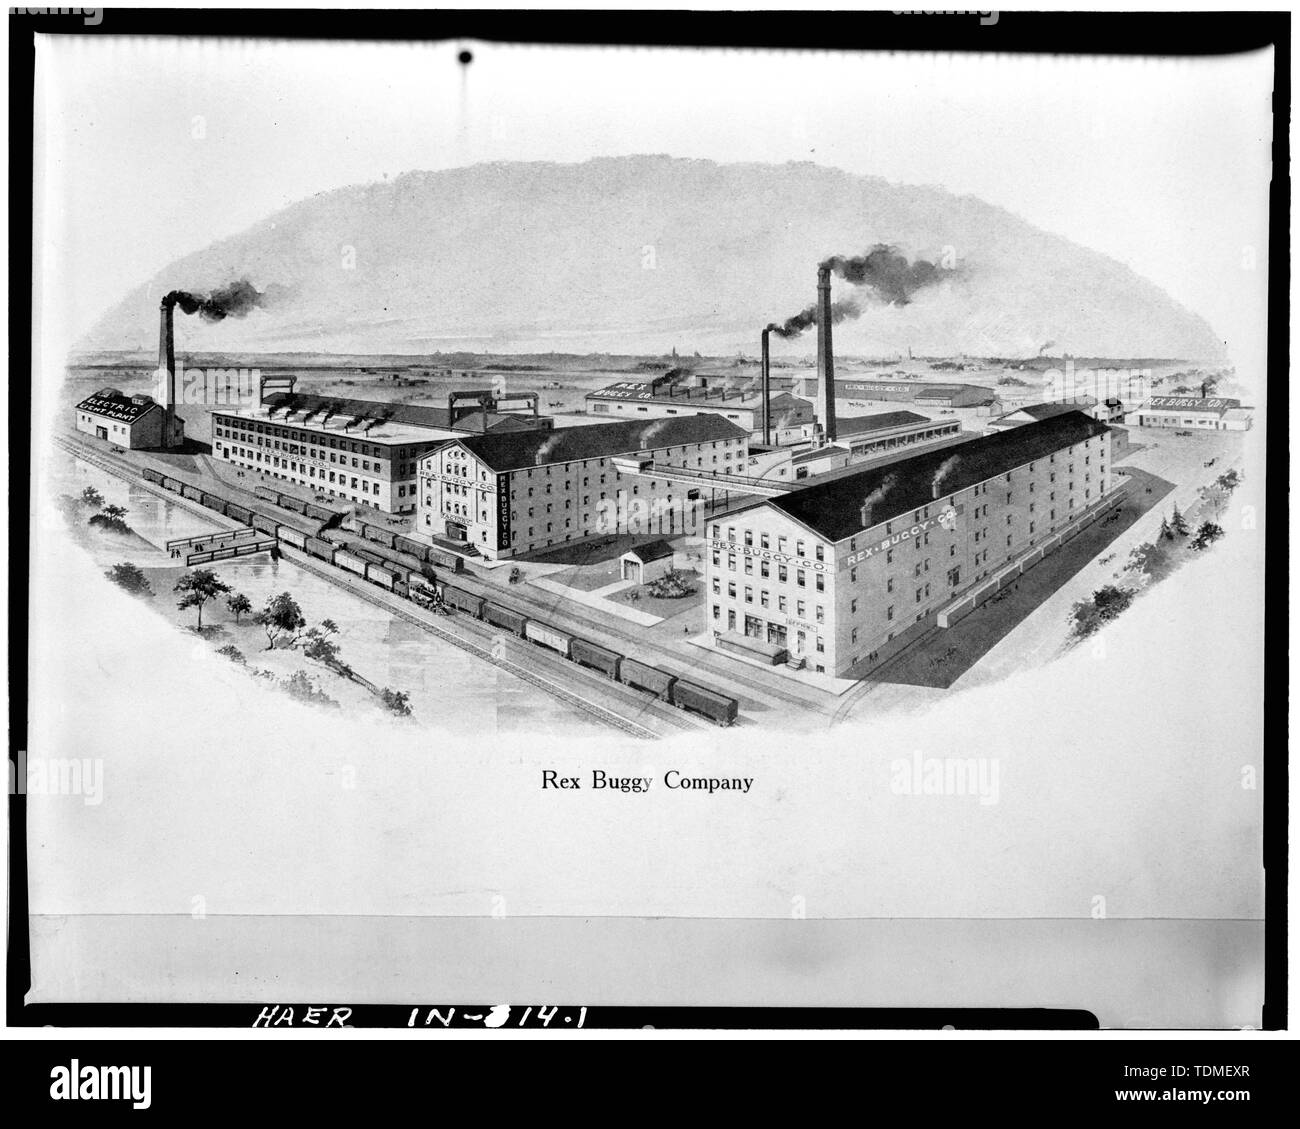 PHOTOCOPY FROM 1906 ILLUSTRATION IN COLLECTION OF HENRY BLOMMEL, CONNERSVILLE, INDIANA - Munk and Roberts Furniture Company, Western Avenue, Connersville, Fayette County, IN; Munk and Roberts Furniture Company; Rex Buggy Company; Valley Furniture Company; Munk, Herman; Newkirk, William; Roberts, James E; Rosenberg, Robert; Sackheim, Donald Stock Photo